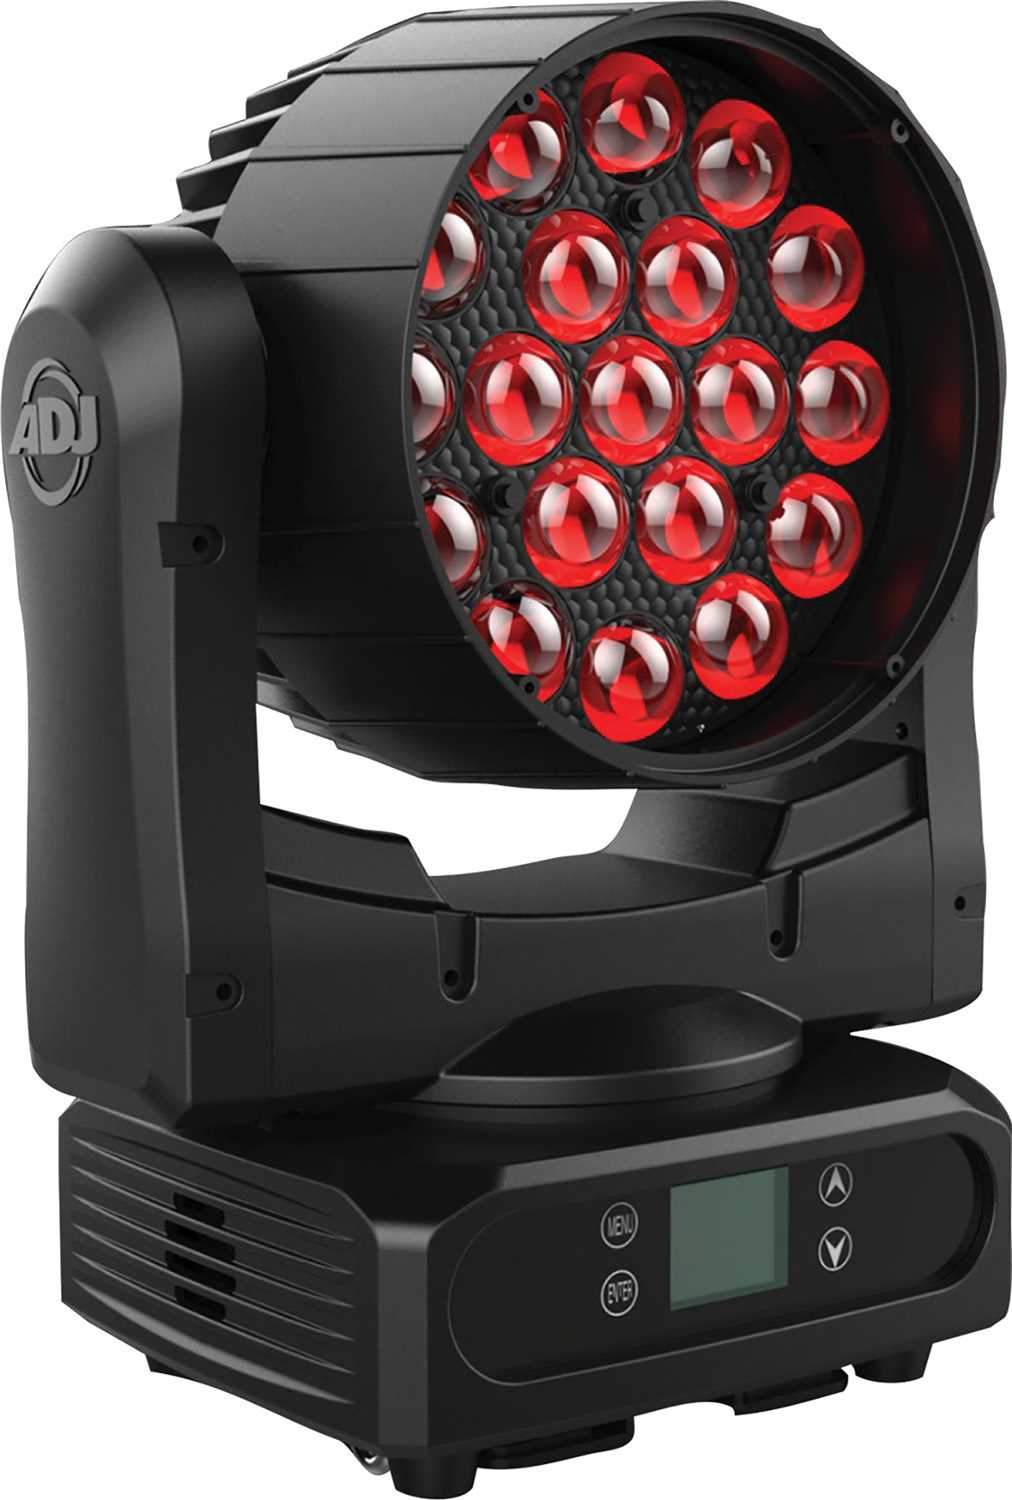 ADJ American DJ Vizi Wash Z19 380W Moving Head 2-Pack with Cables - PSSL ProSound and Stage Lighting